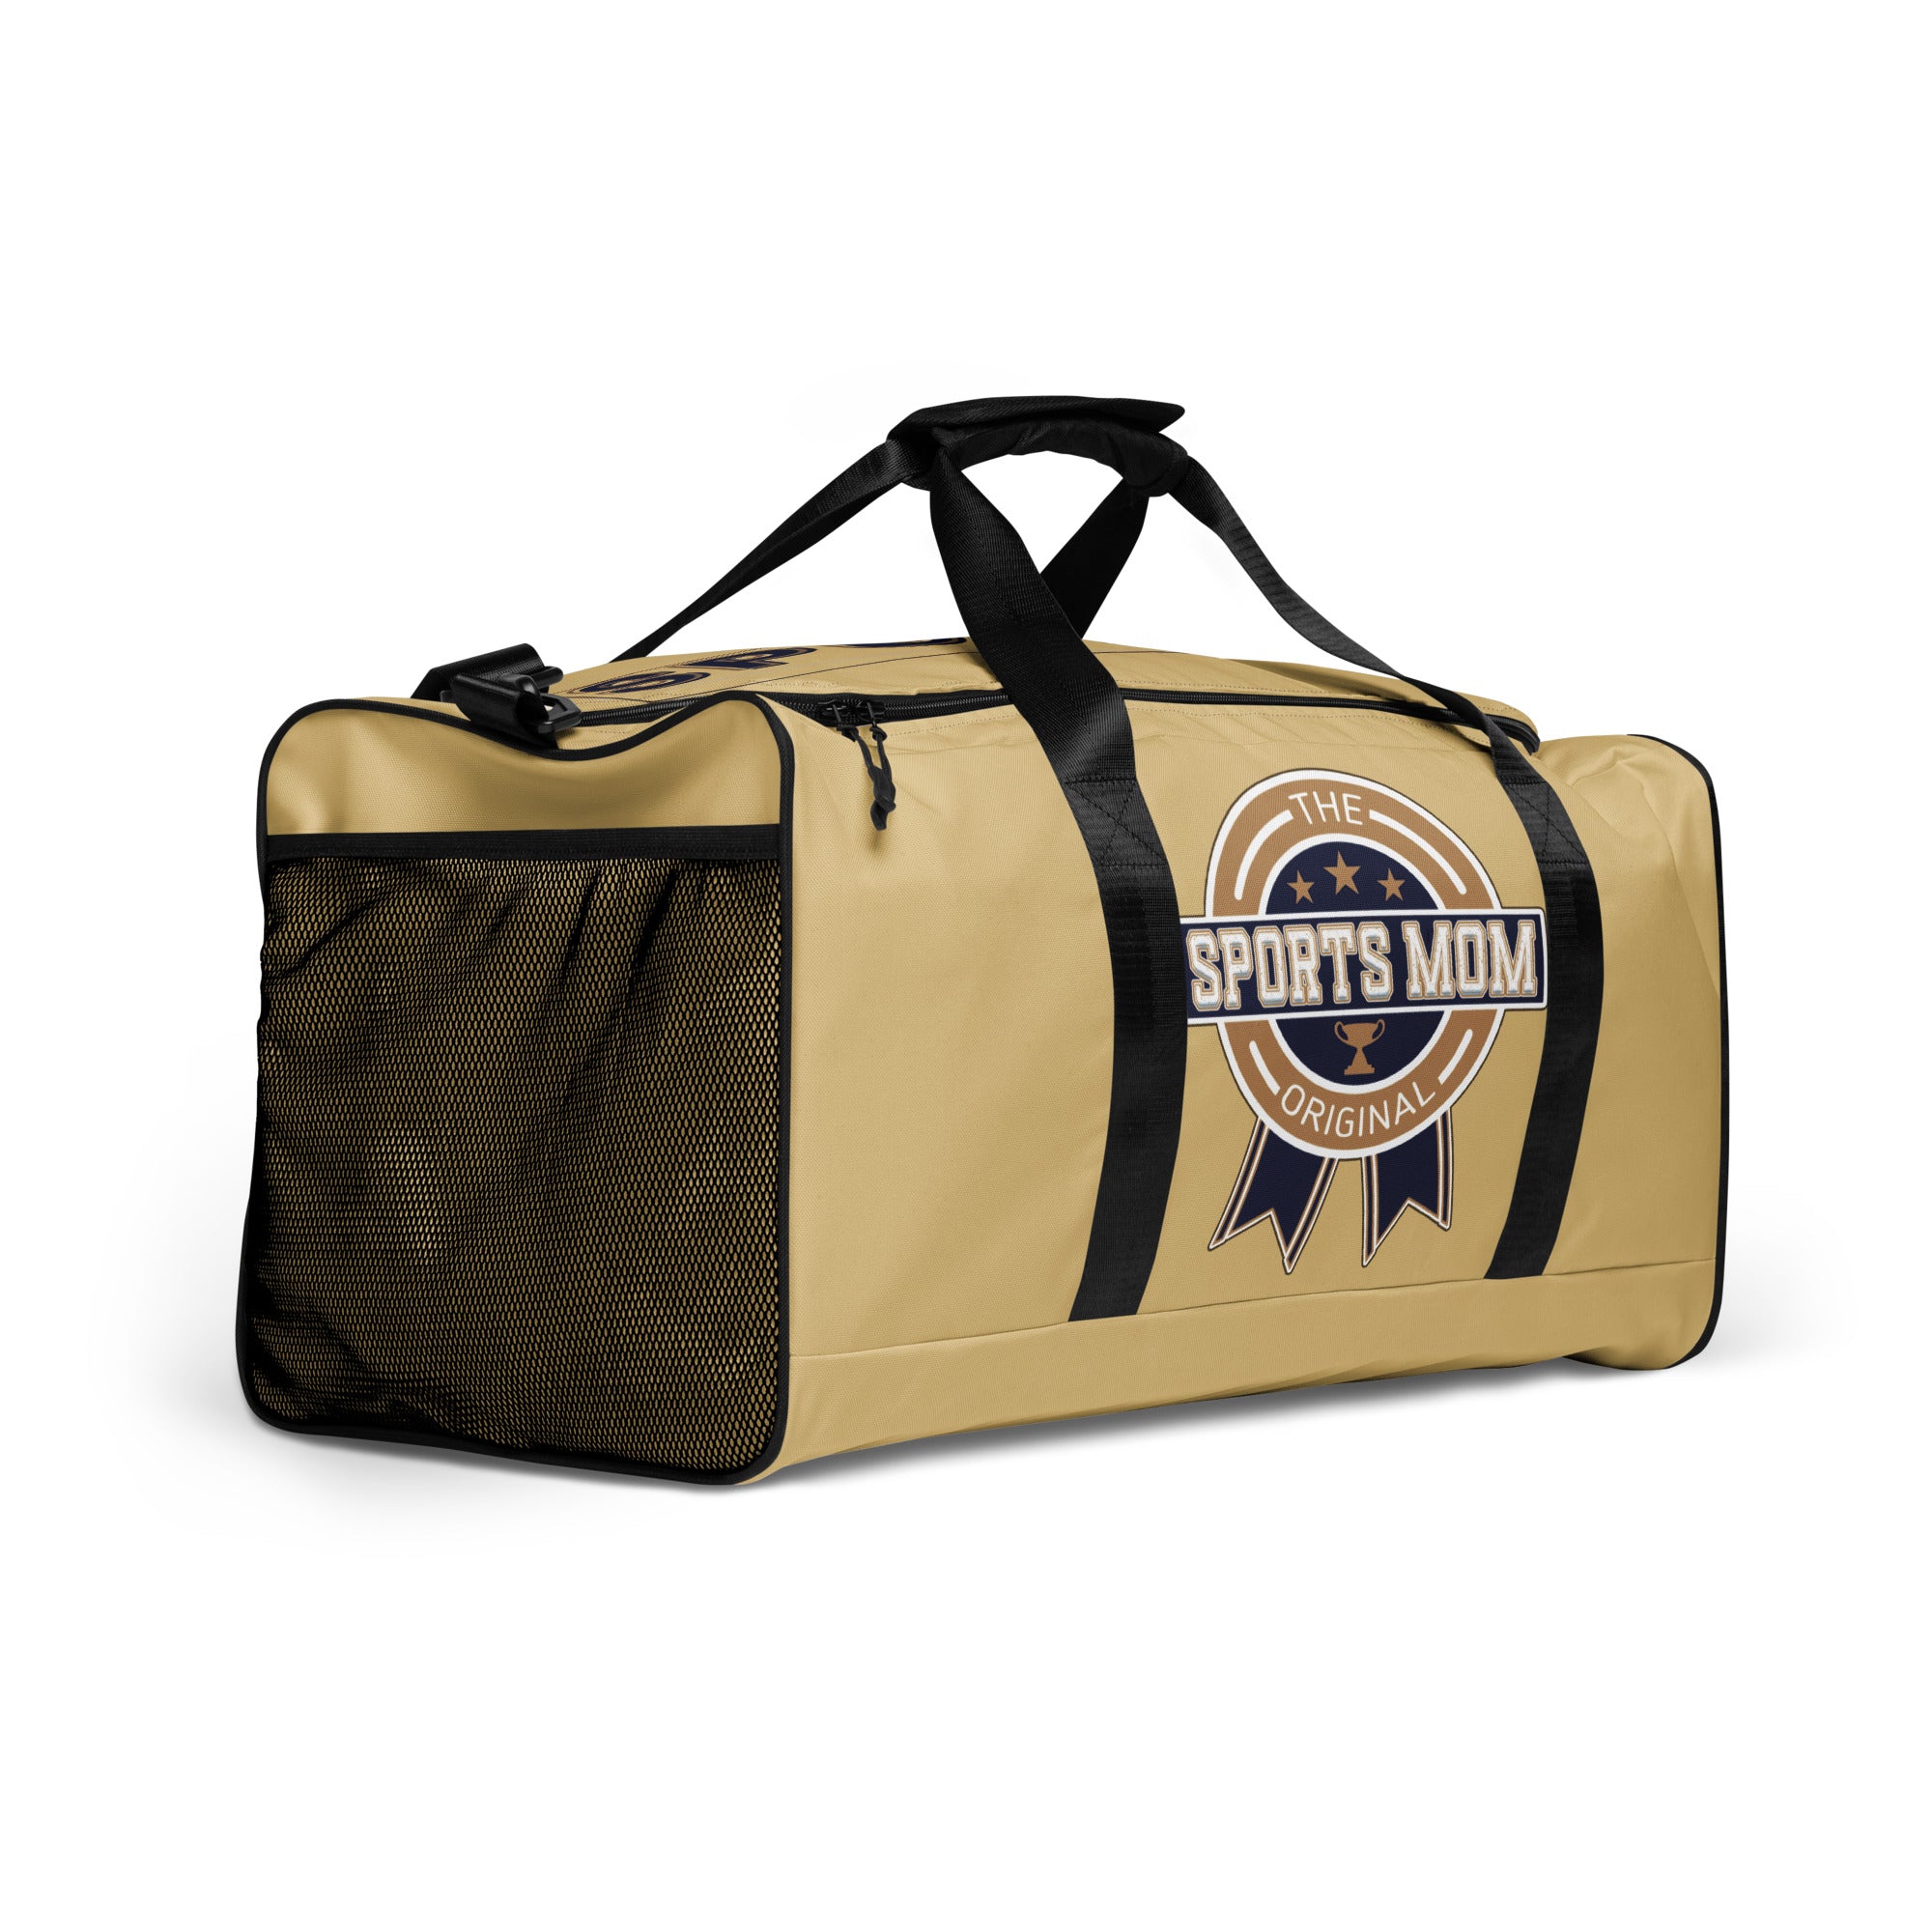 Sports Mom - Away Game - Ultimate Duffle Bag - New Orleans